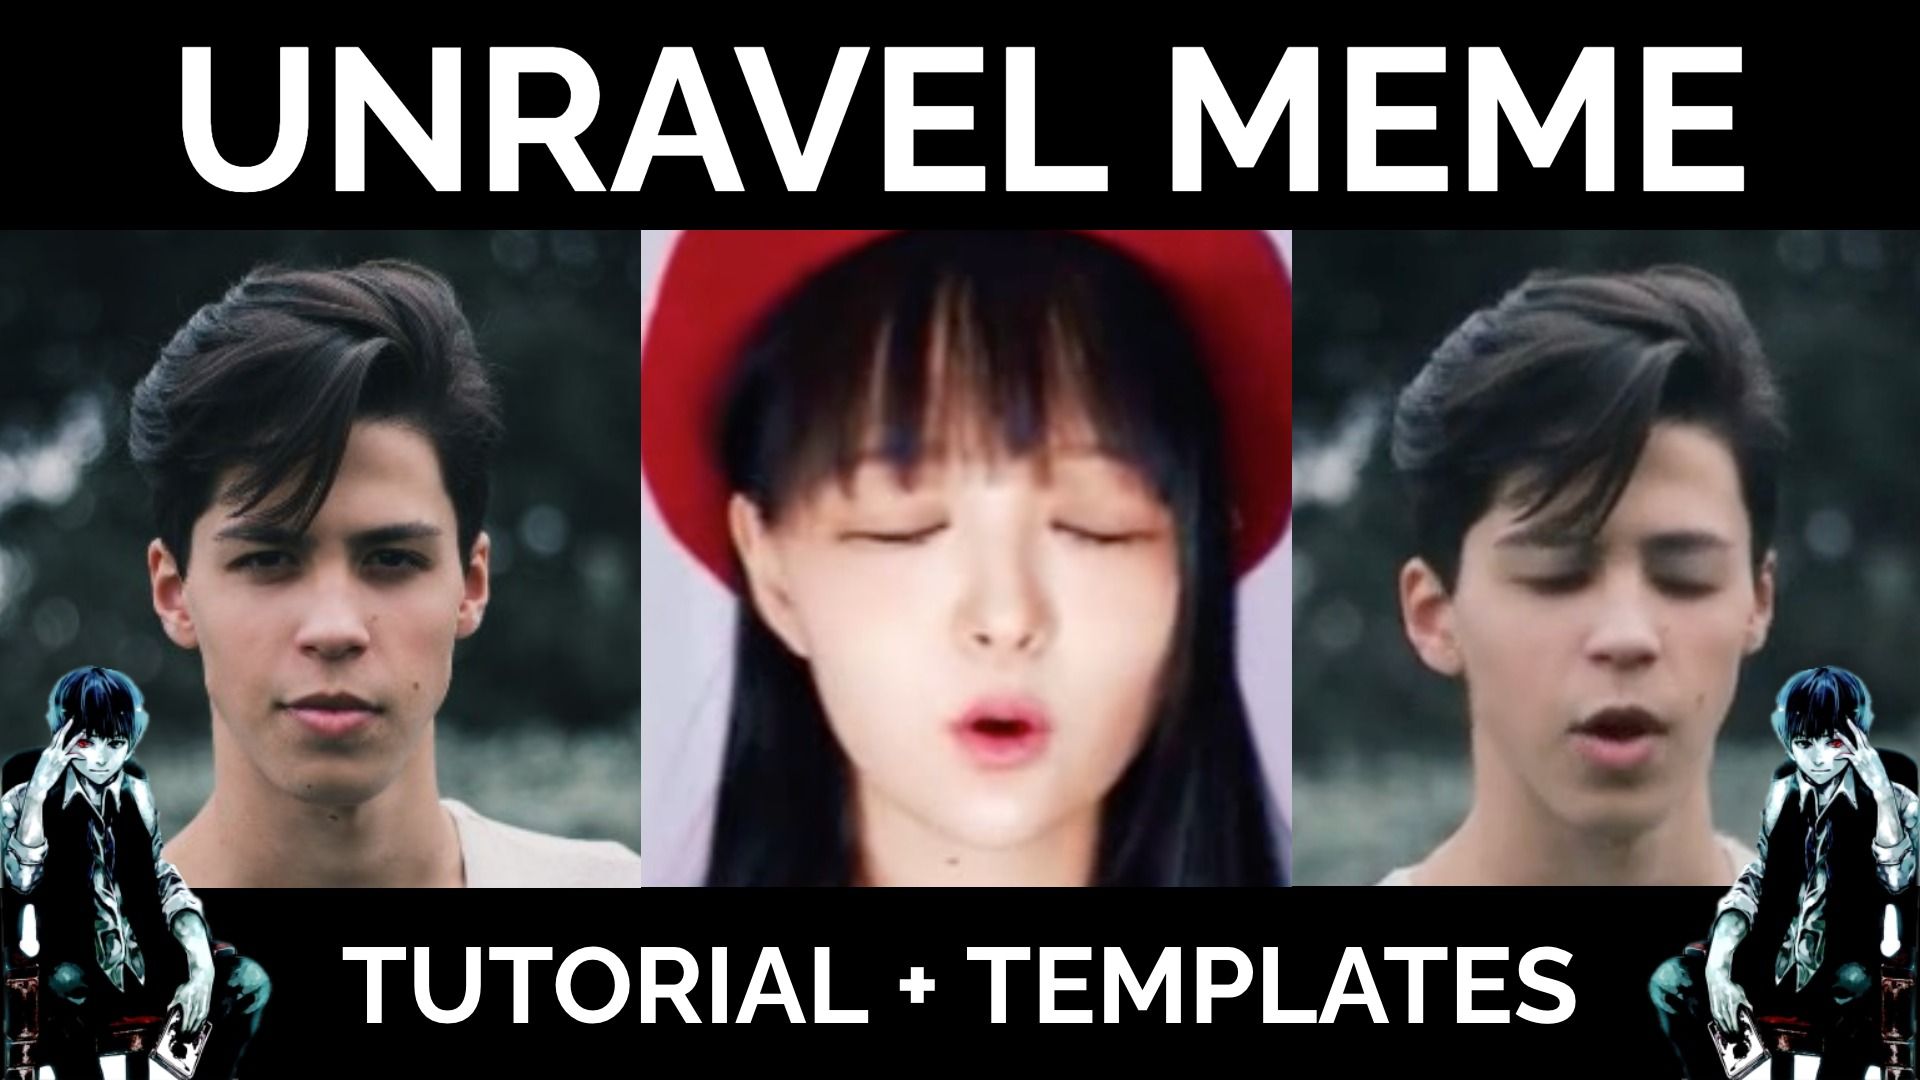 How To Make The Unravel Tokyo Ghoul Deepfake Meme Templates Included